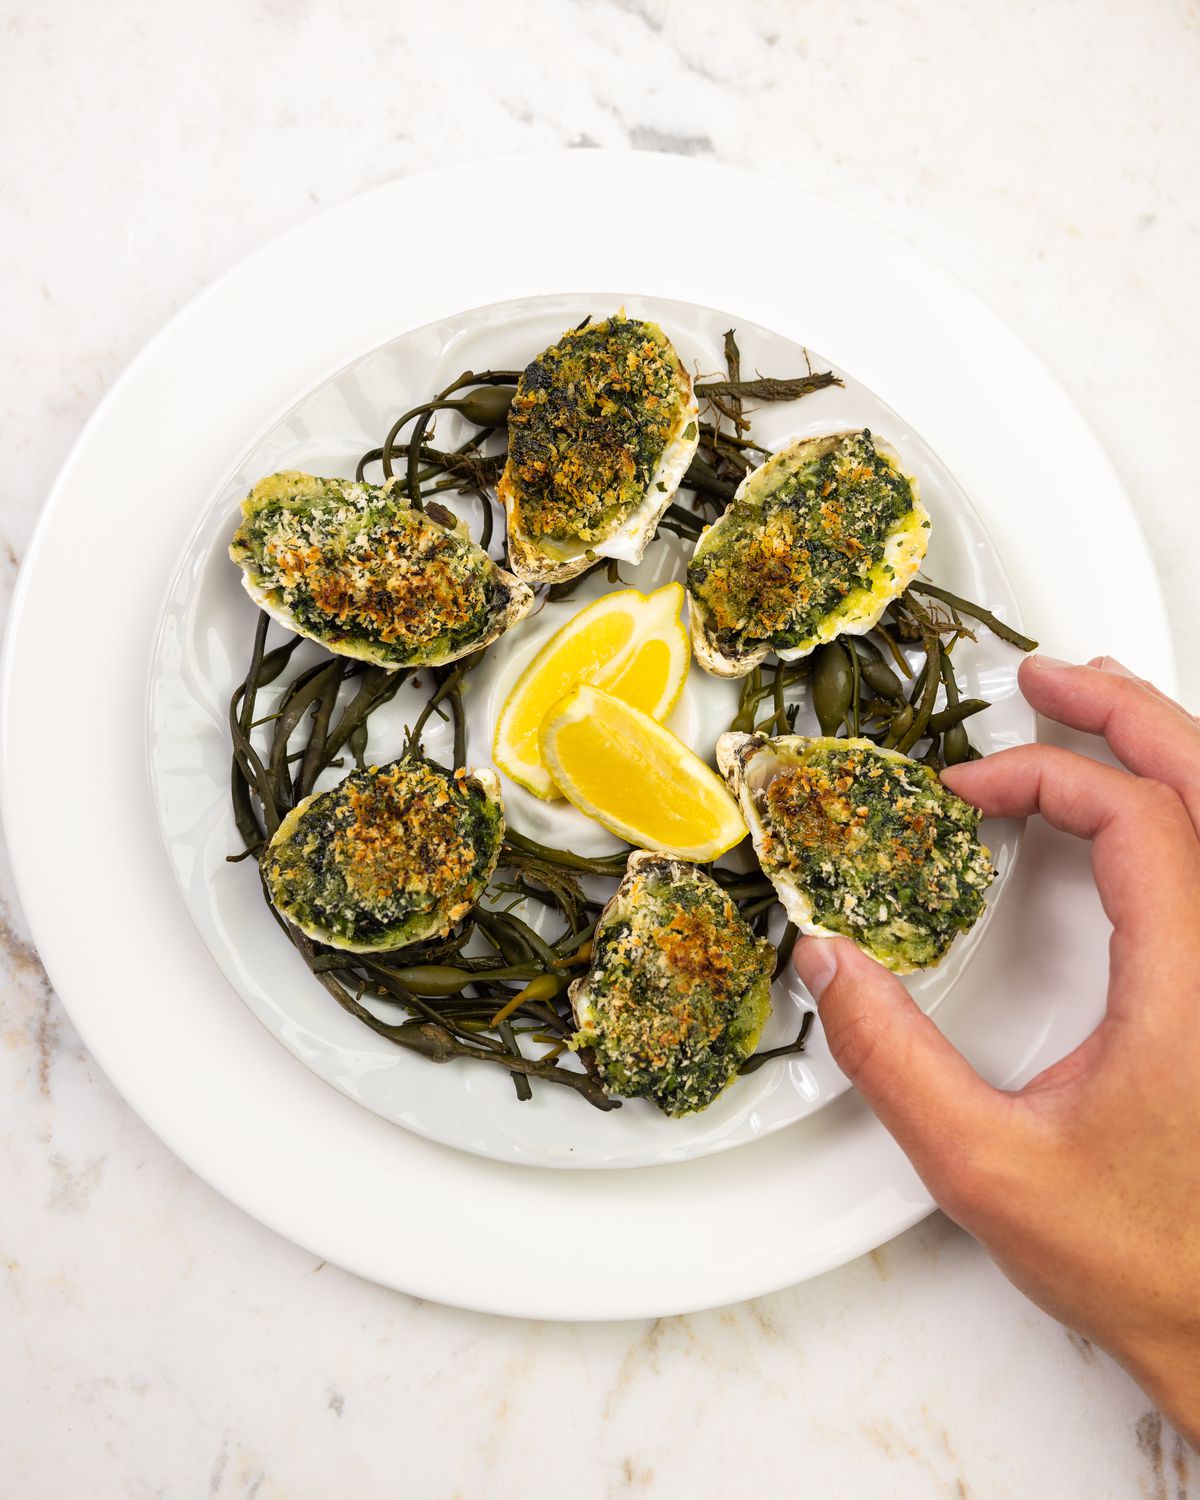 A plate of oysters Rockefeller with lemon wedges at the center